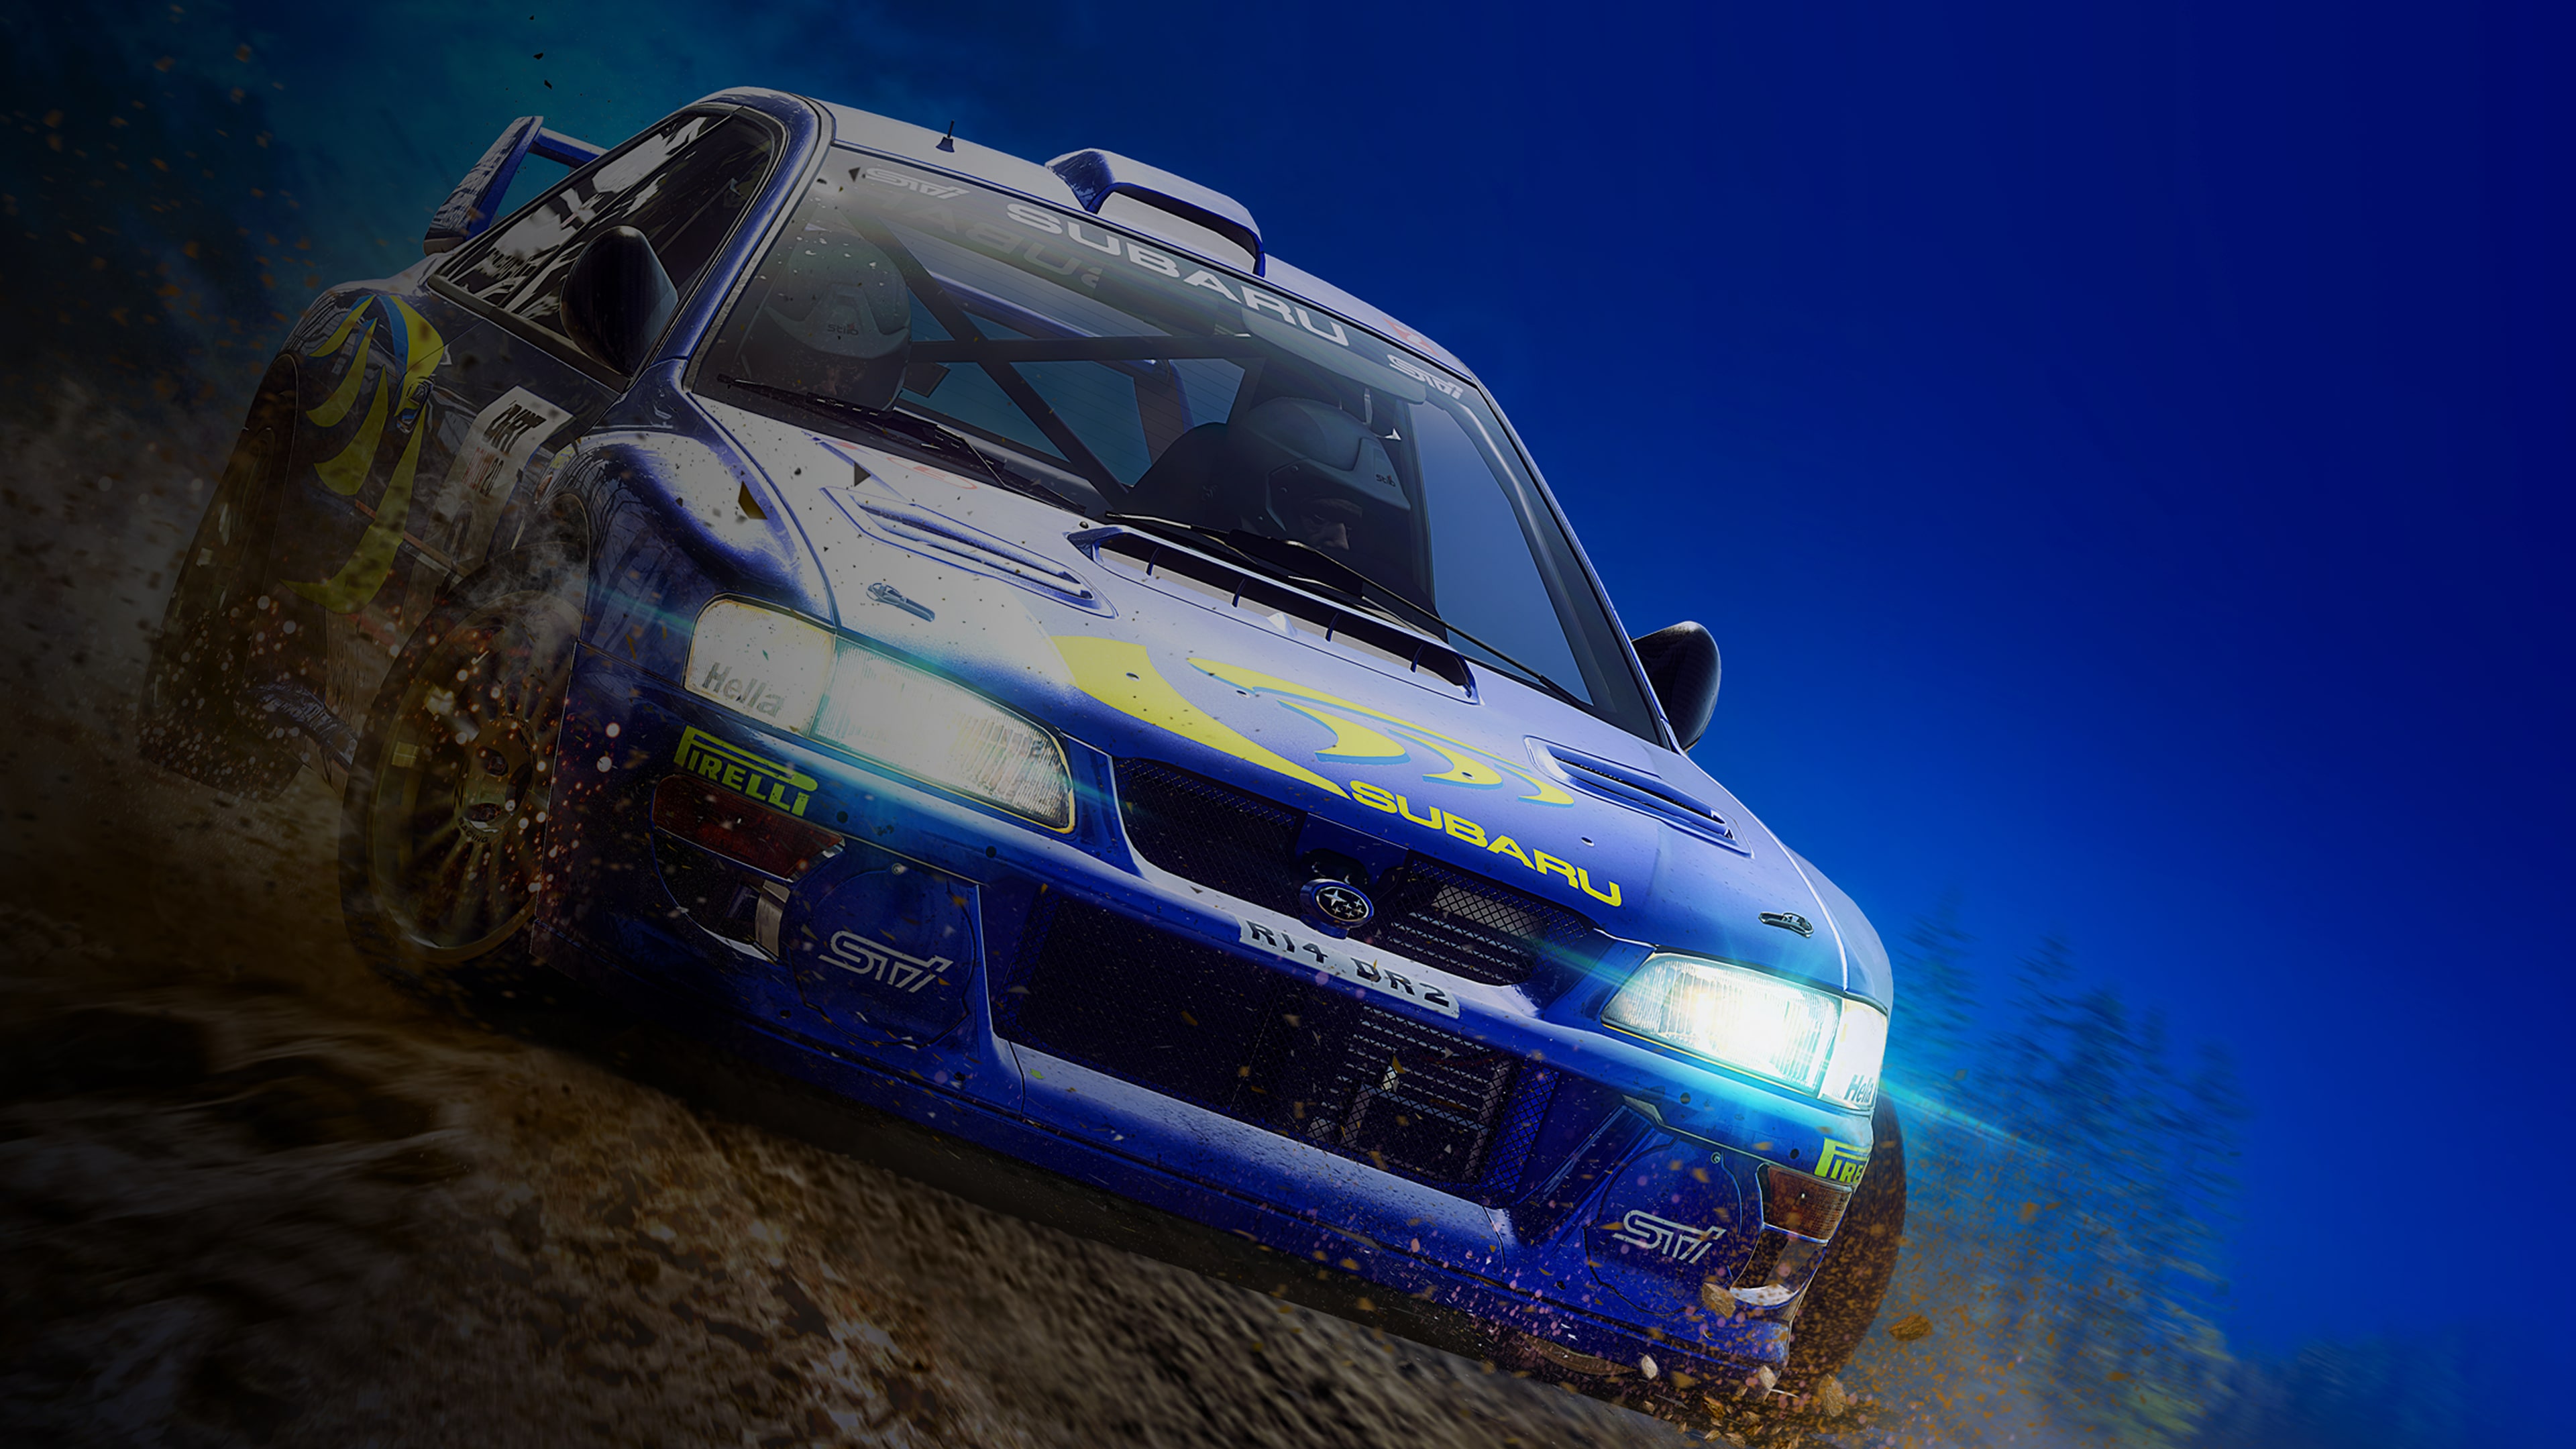 DiRT Rally 2.0 - Colin McRae: FLAT OUT Pack